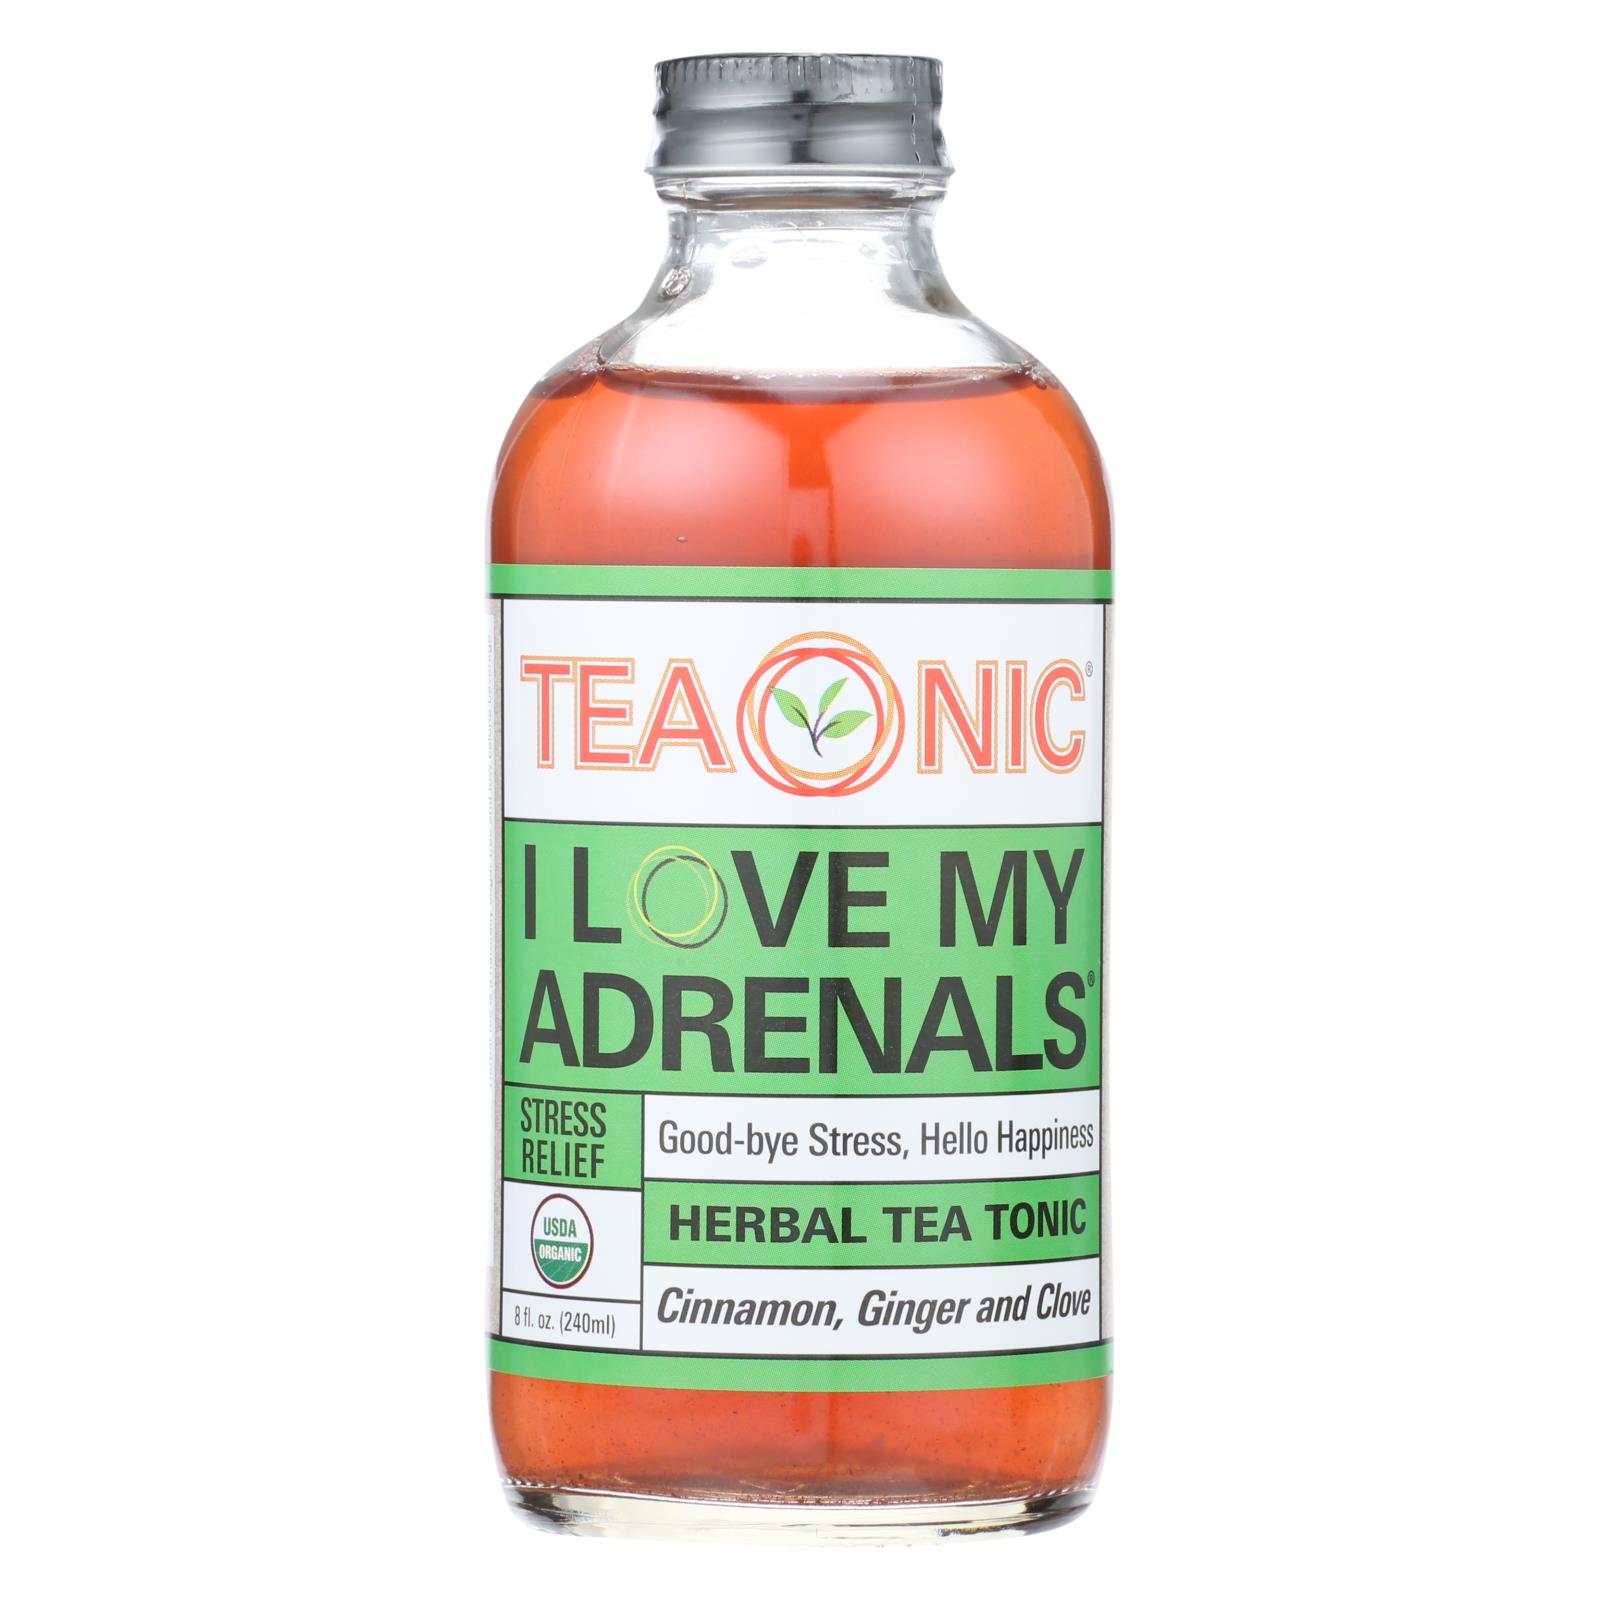 Teaonic, I Love My Adrenals Herbal Tea Supplement - 6개 묶음상품 - 8 FZ